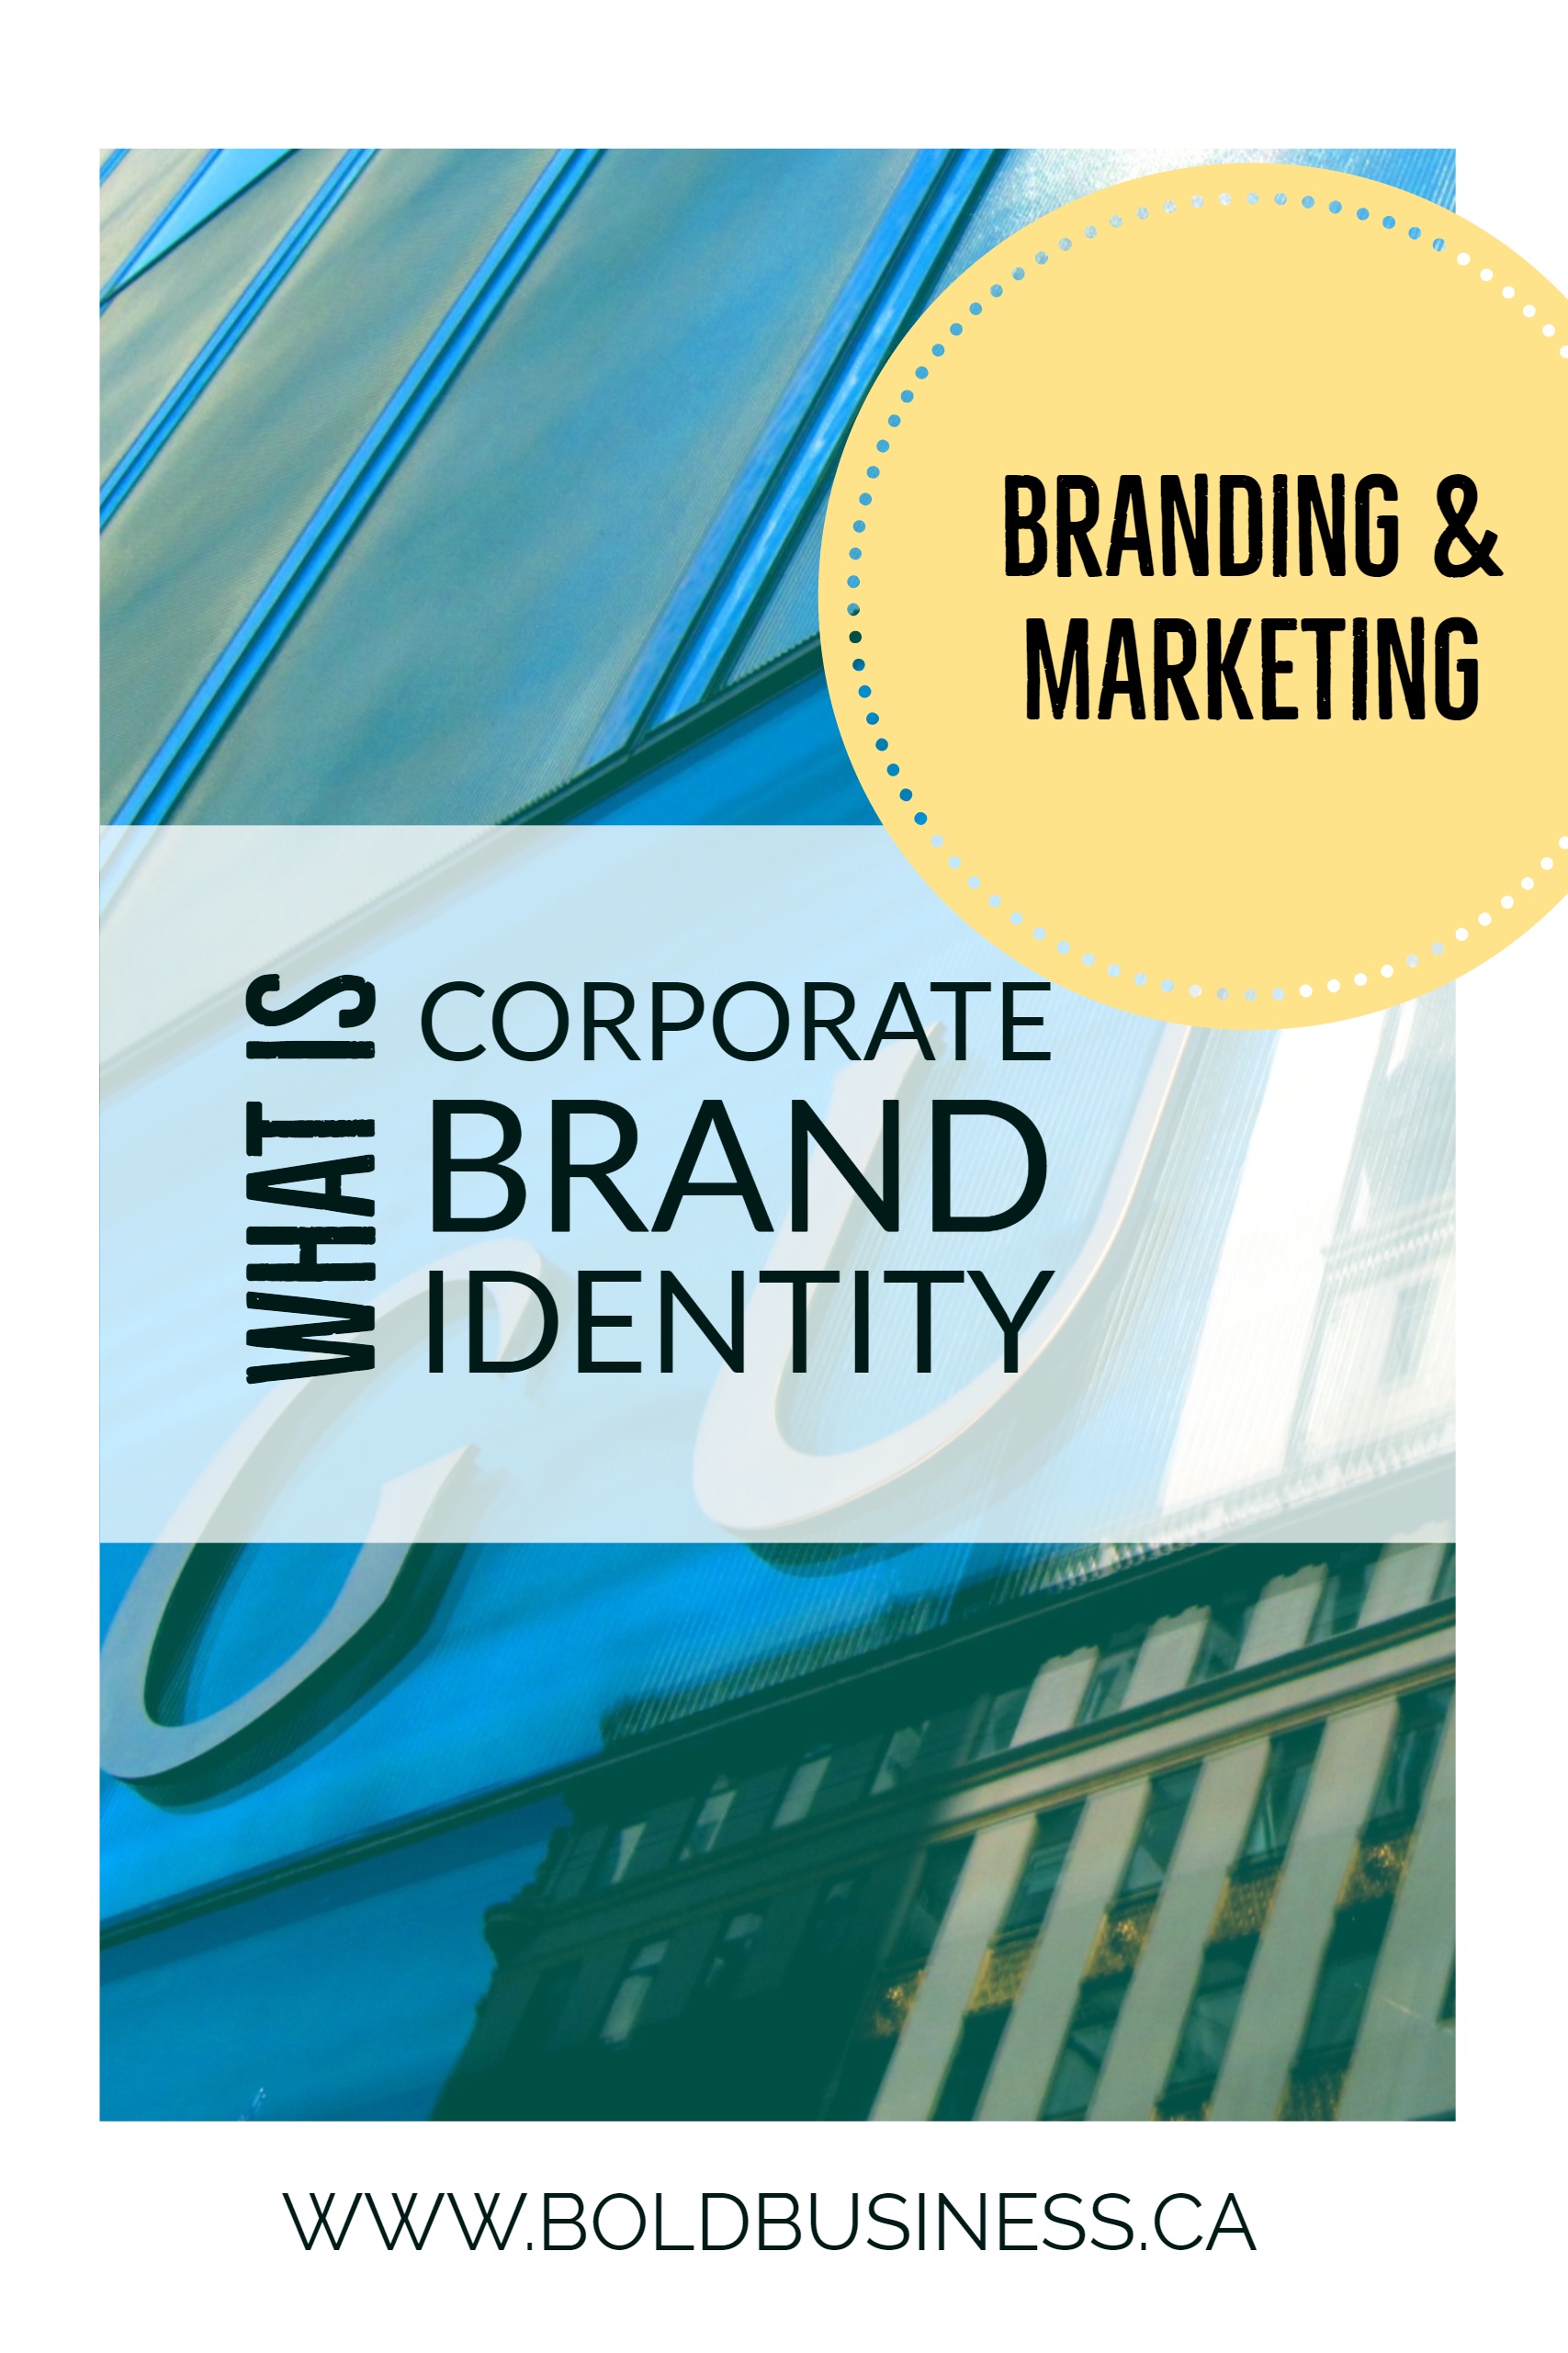 What is Corporate Brand Identity